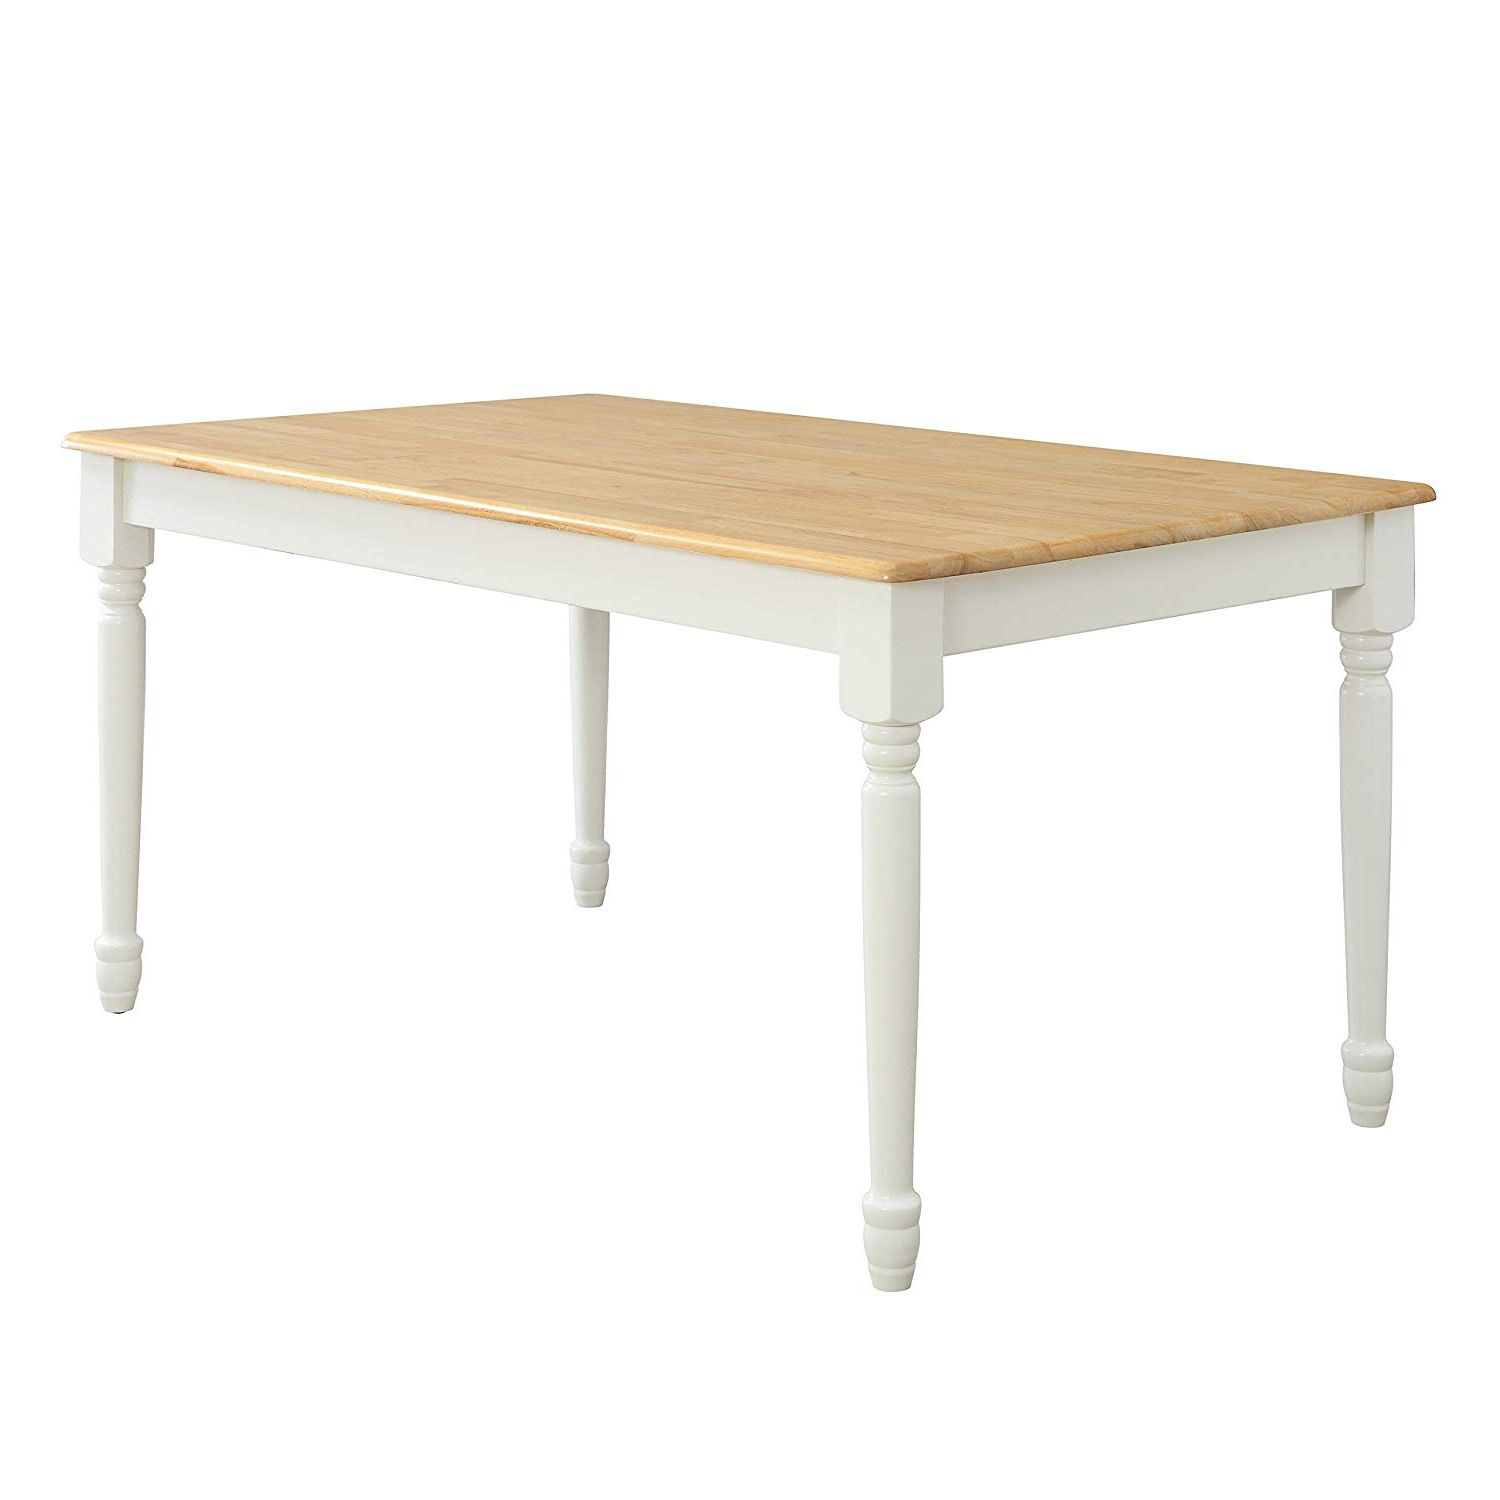 Well Known Large Rustic Look Dining Tables Within Amazon – Sturdy White/natural Rectangular Dining Table (View 9 of 25)